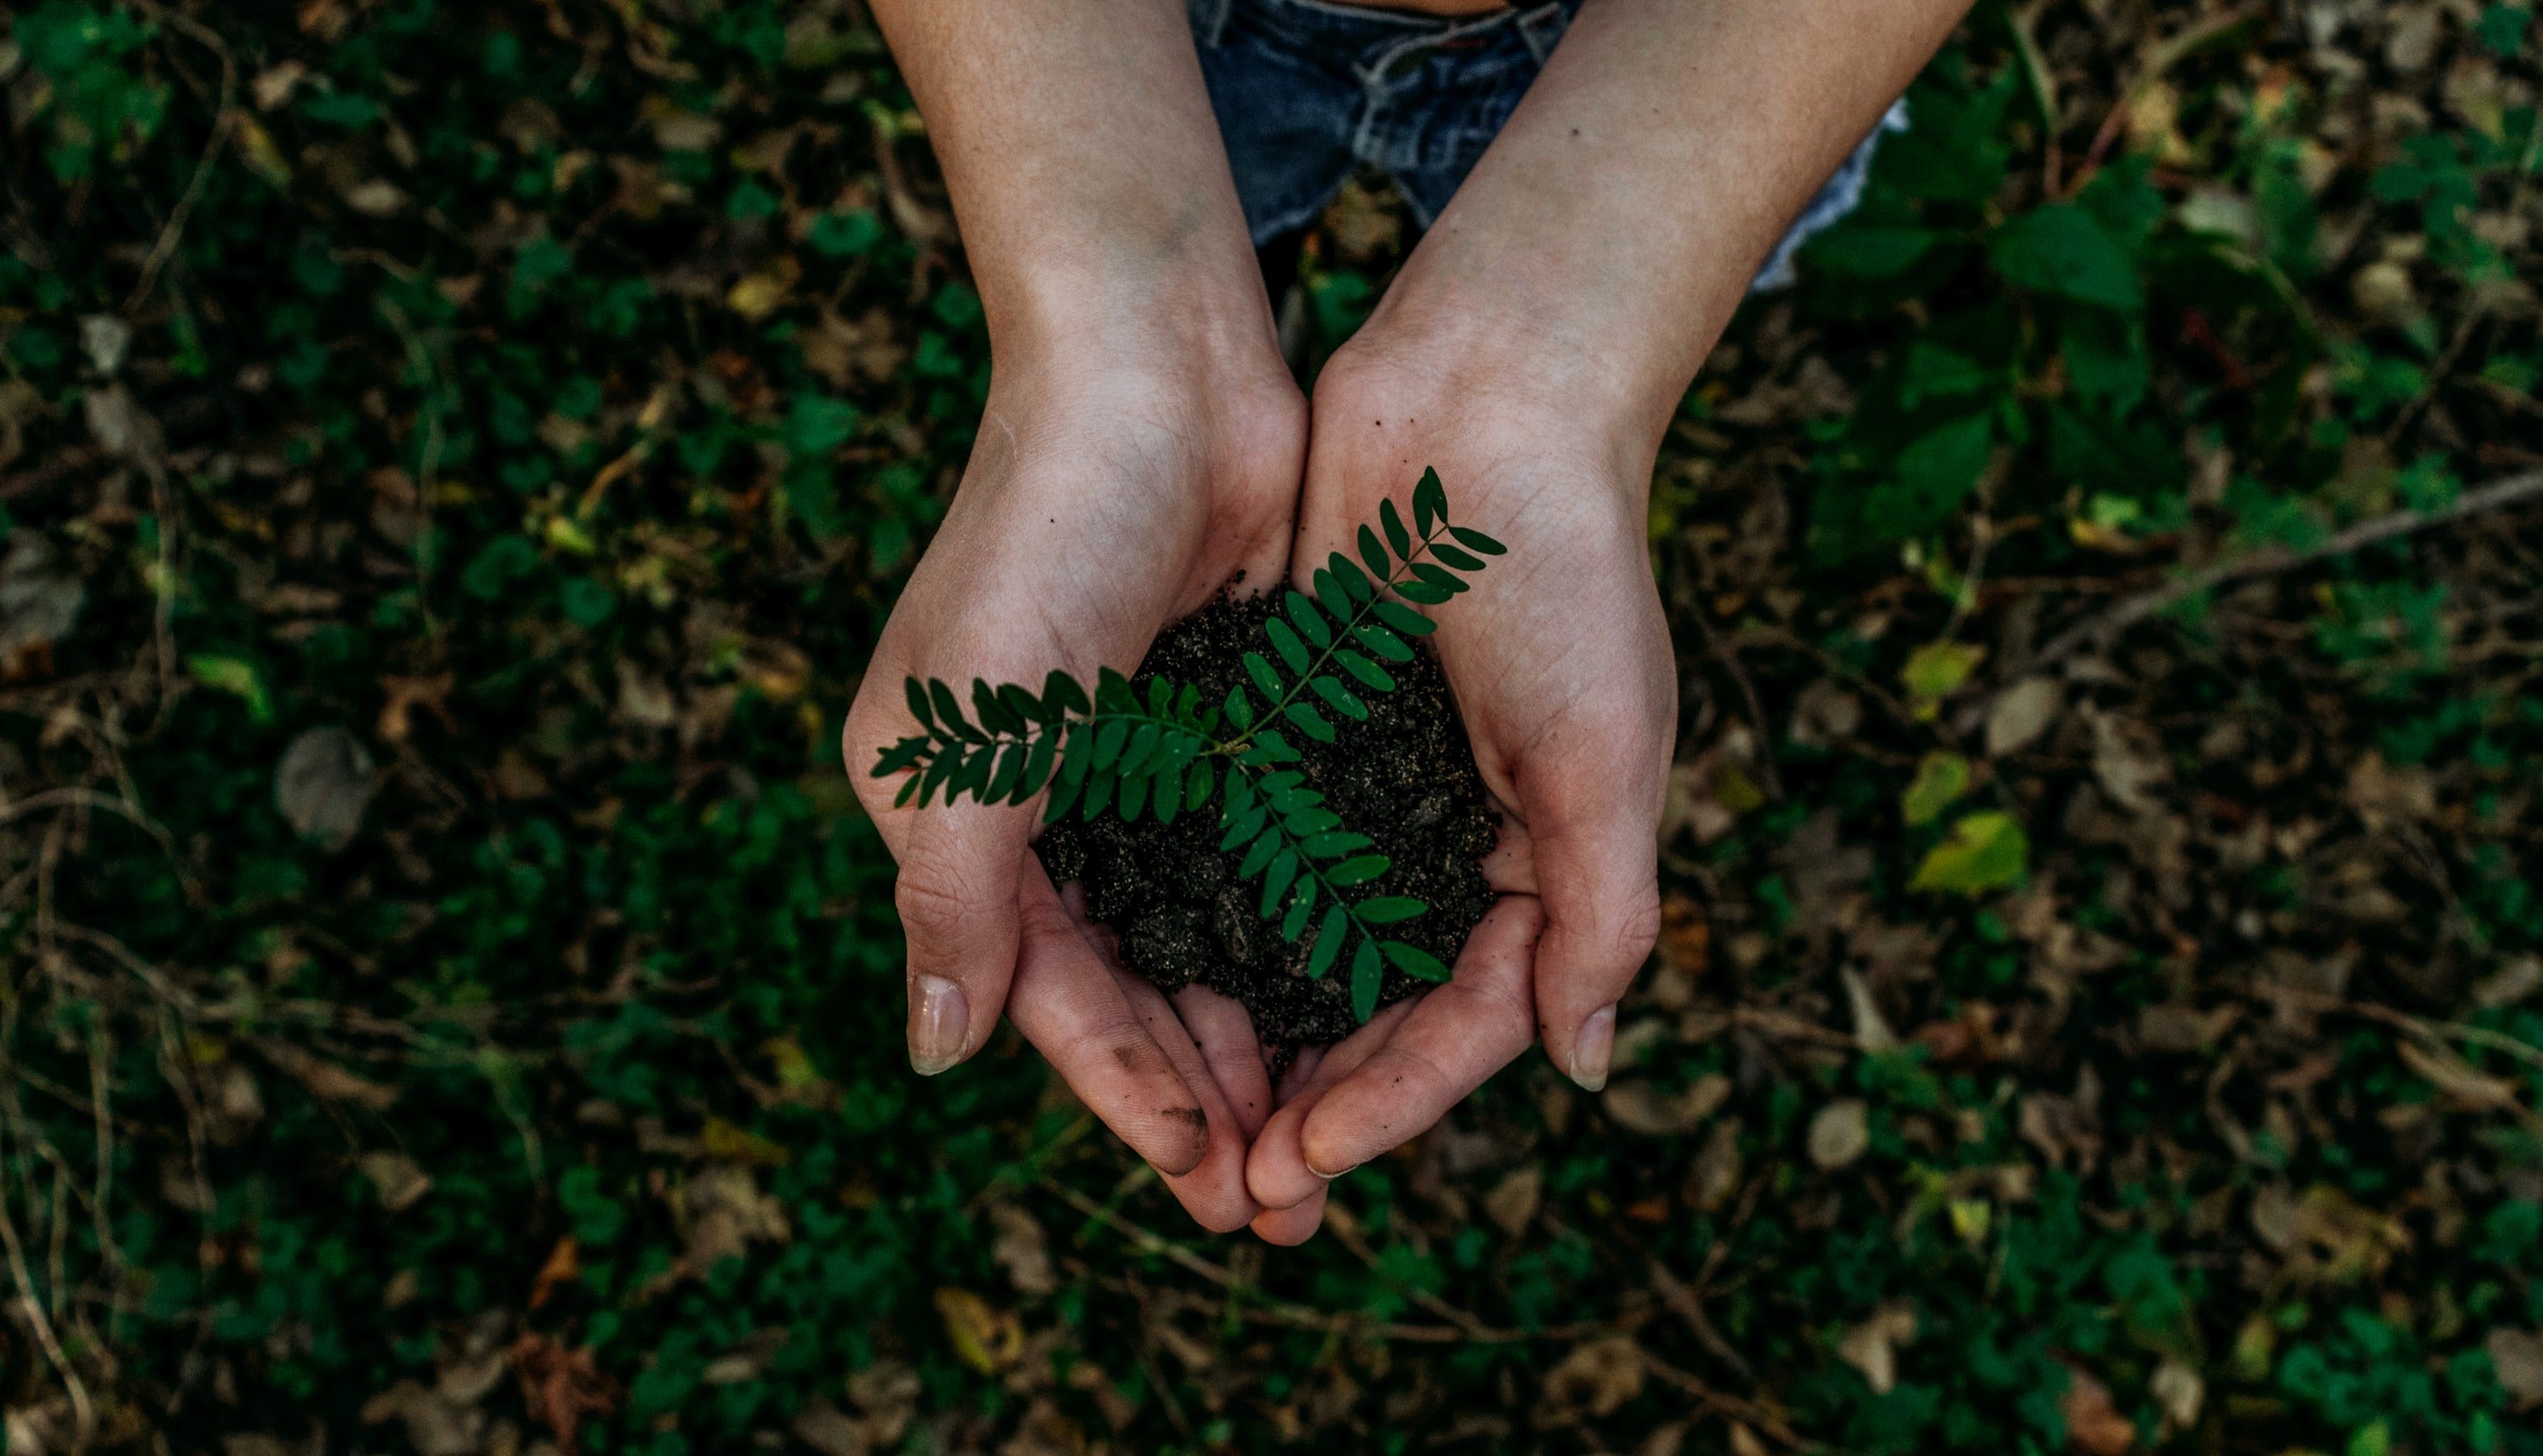 In exchange for Frank's water, the people planted trees. | Source: Unsplash